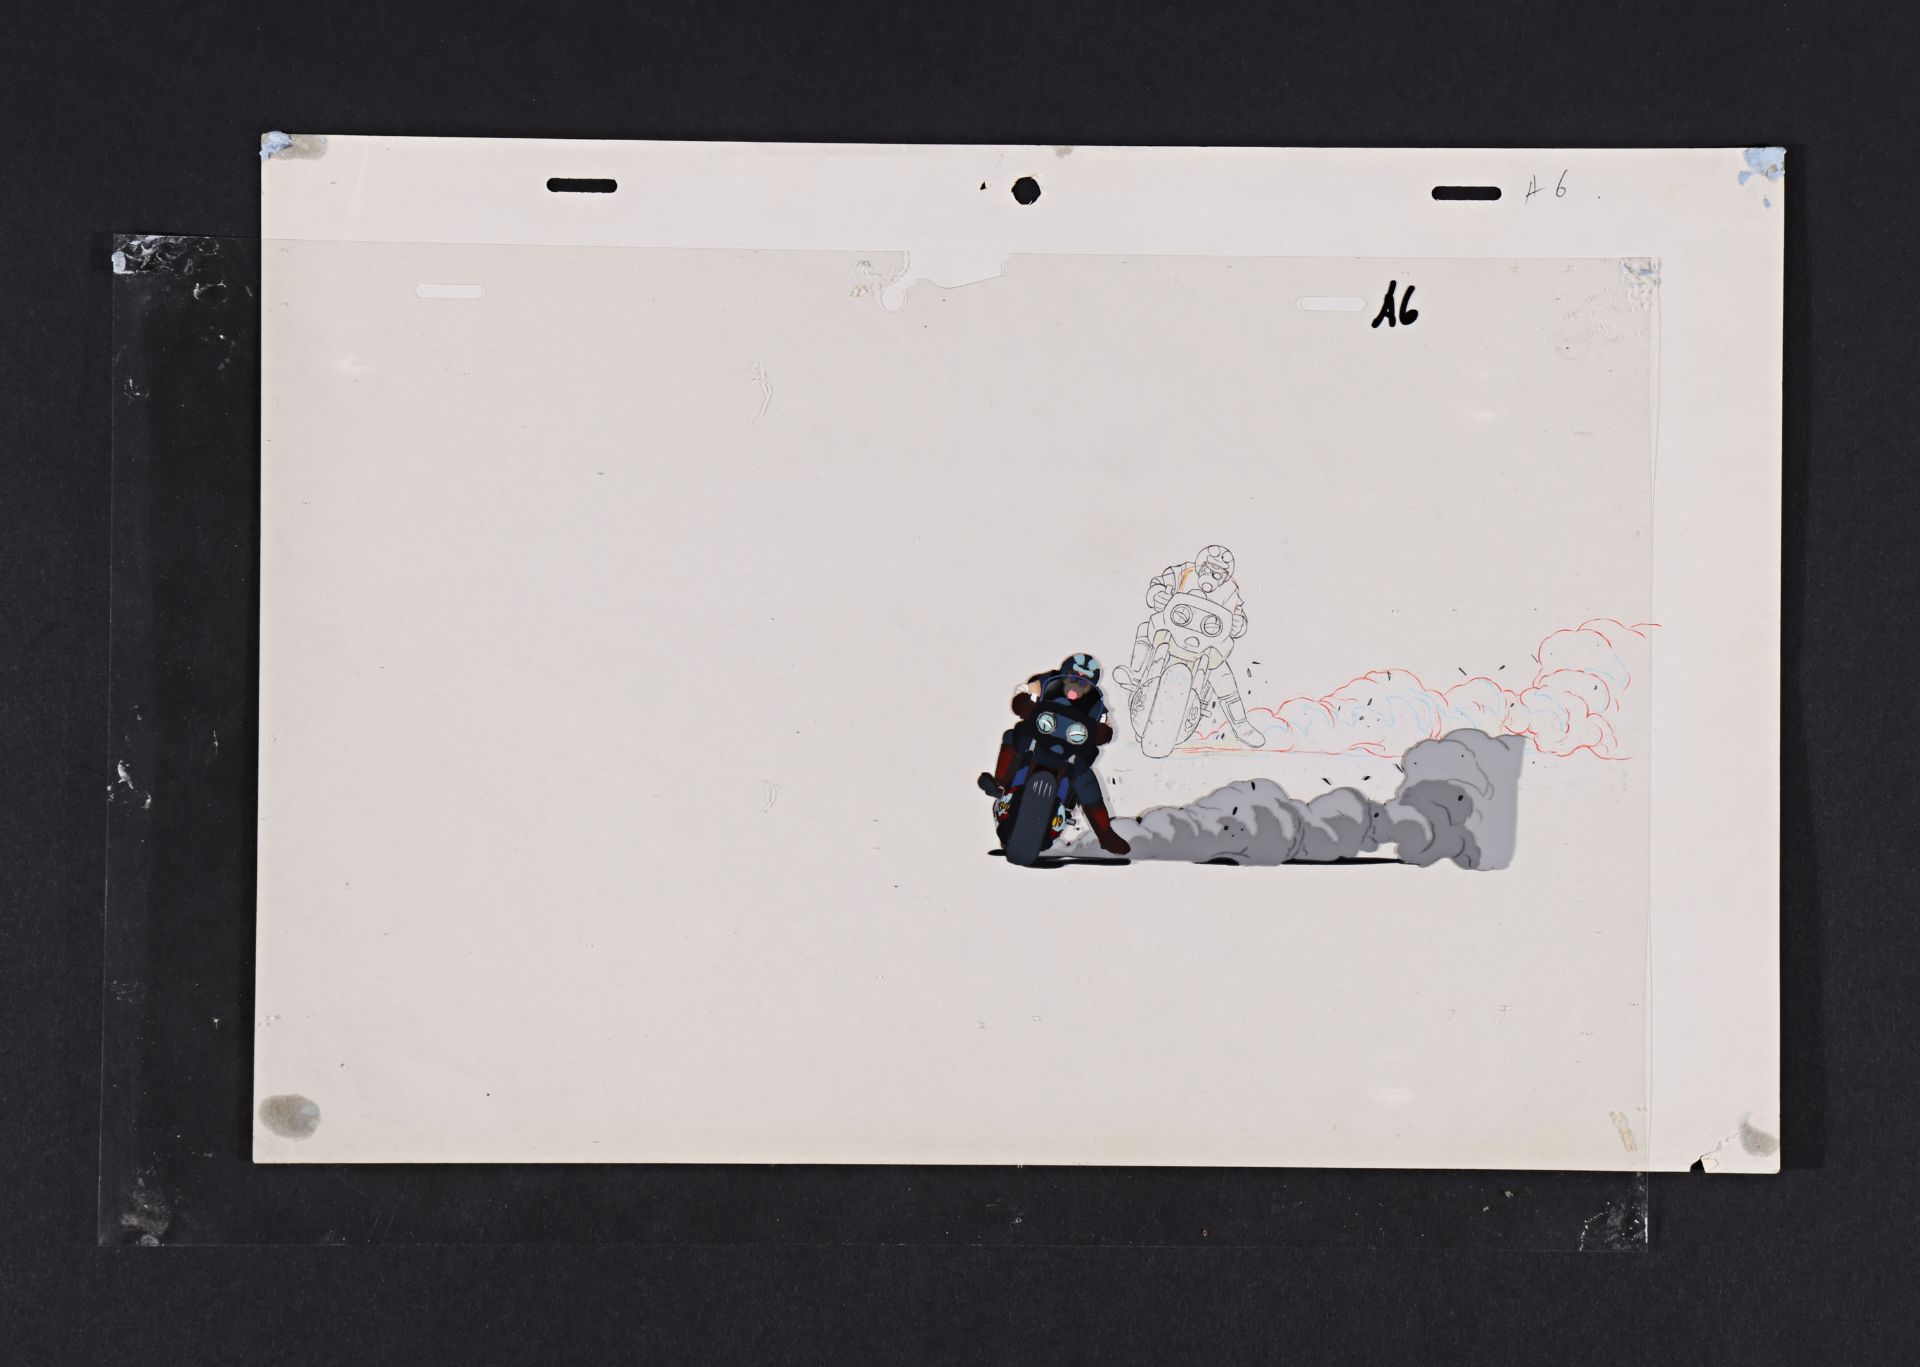 AKIRA (1988) - Five Original Hand-Painted Animation Cels with Drawings, 1988